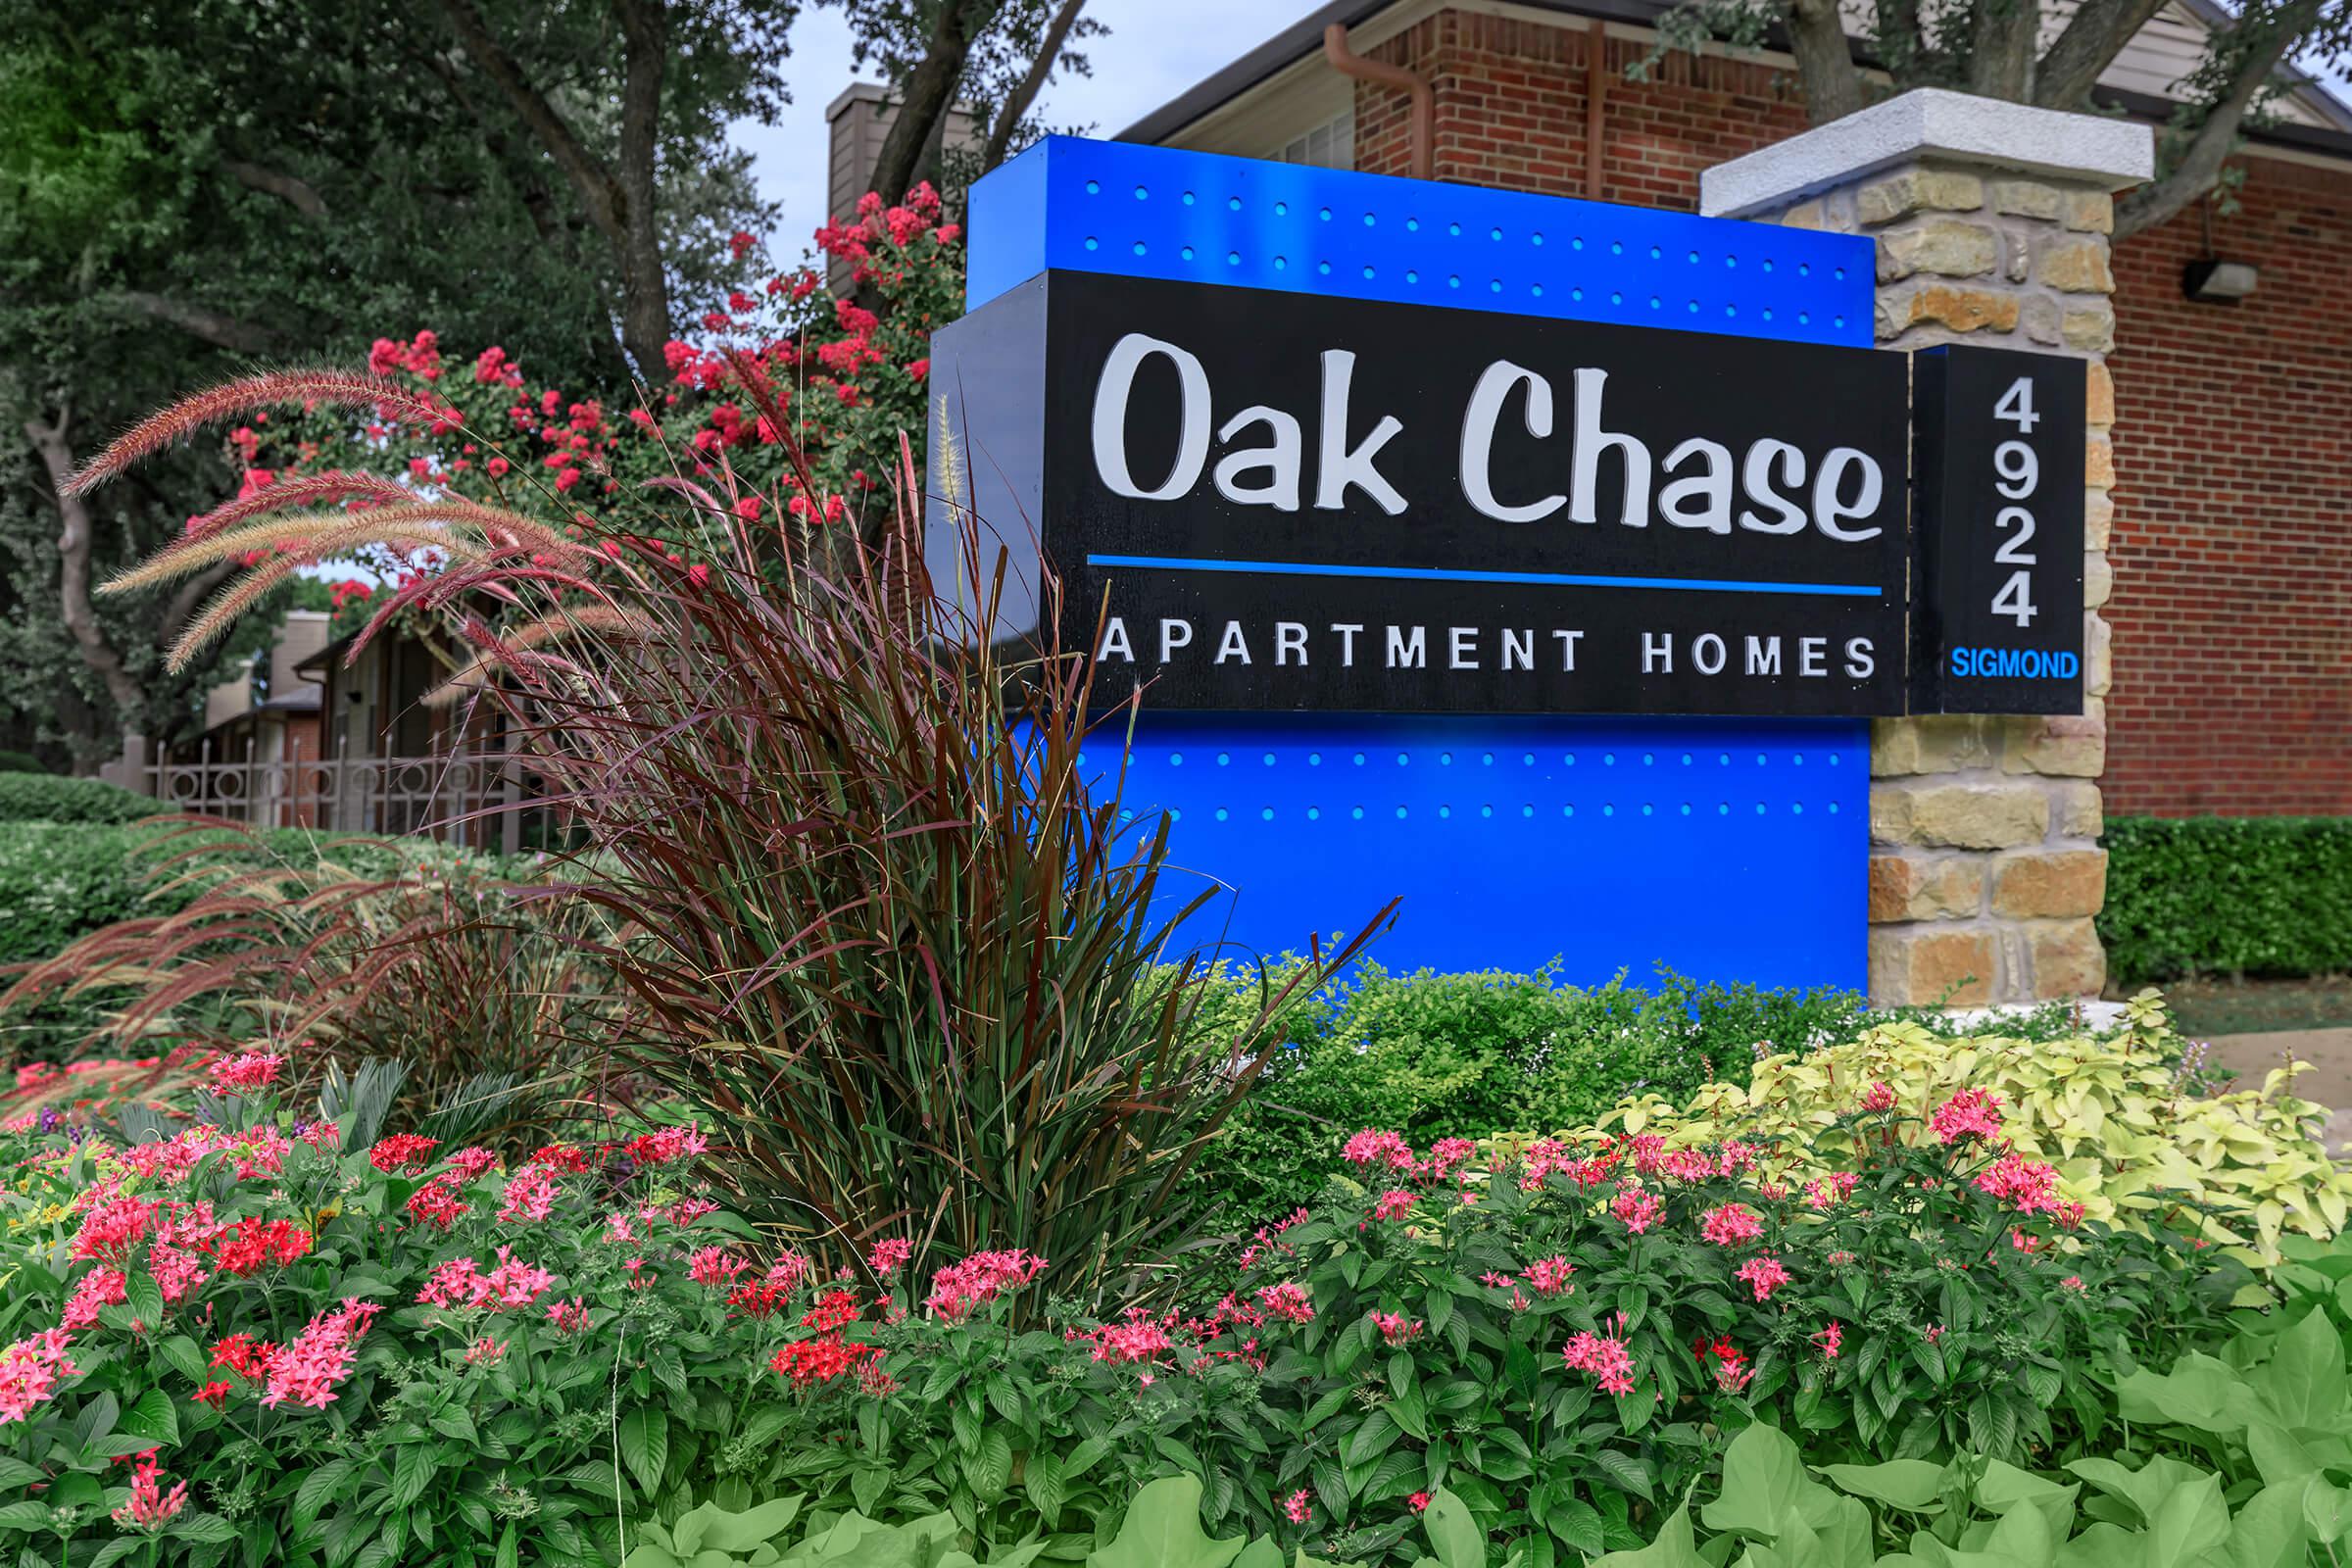 Oak Chase monument sign